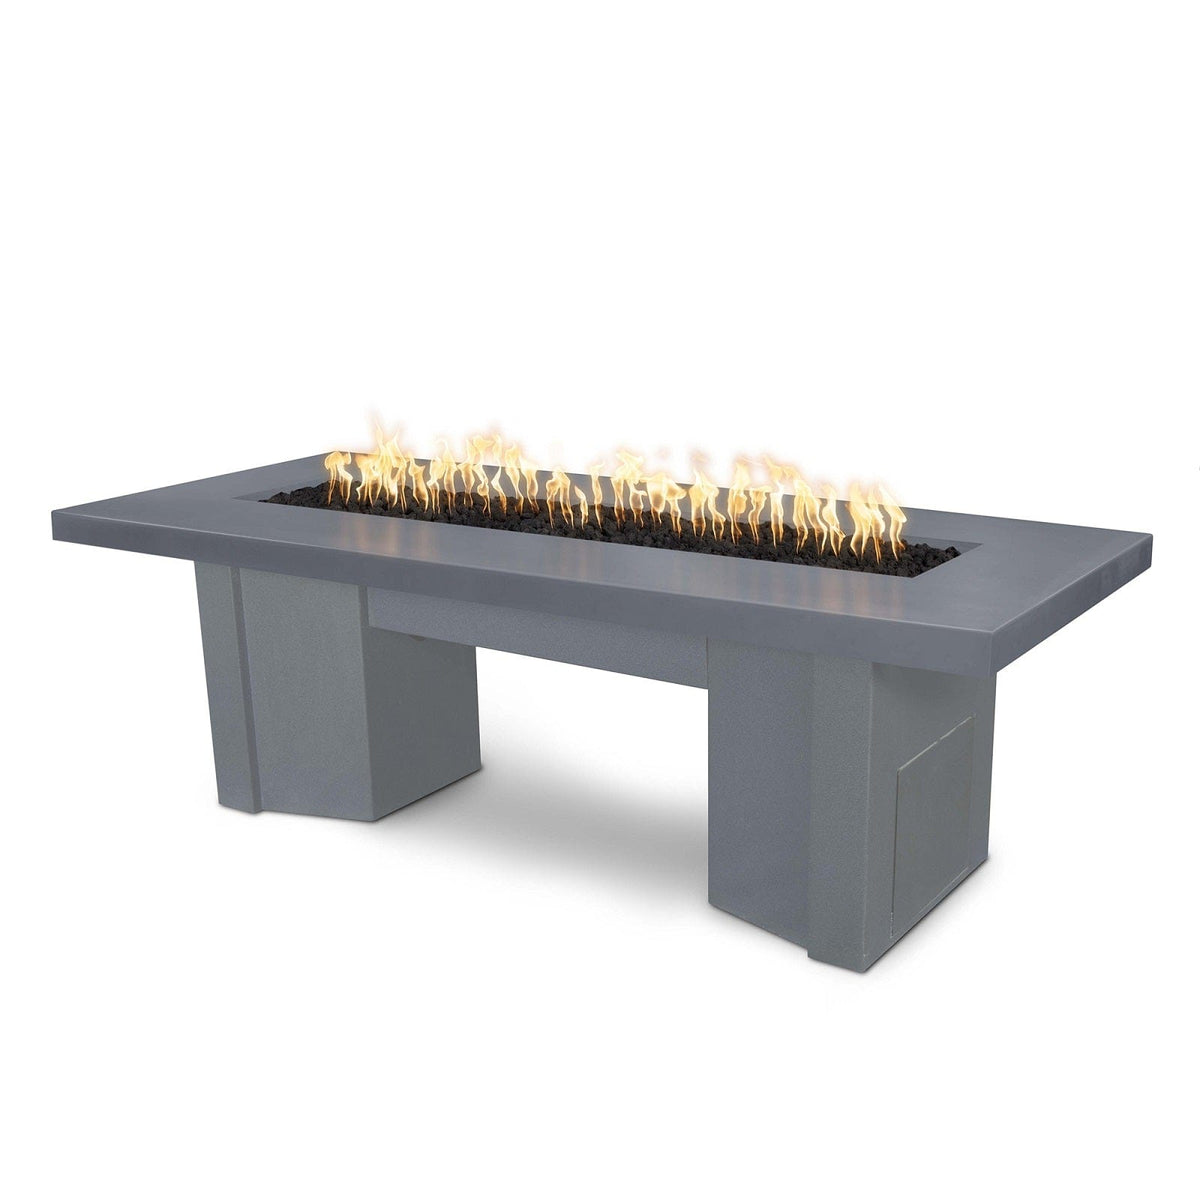 The Outdoor Plus Fire Features Gray (-GRY) / Gray Powder Coated Steel (-GRY) The Outdoor Plus 60&quot; Alameda Fire Table Smooth Concrete in Liquid Propane - 110V Plug &amp; Play Electronic Ignition / OPT-ALMGFRC60EKIT-LP